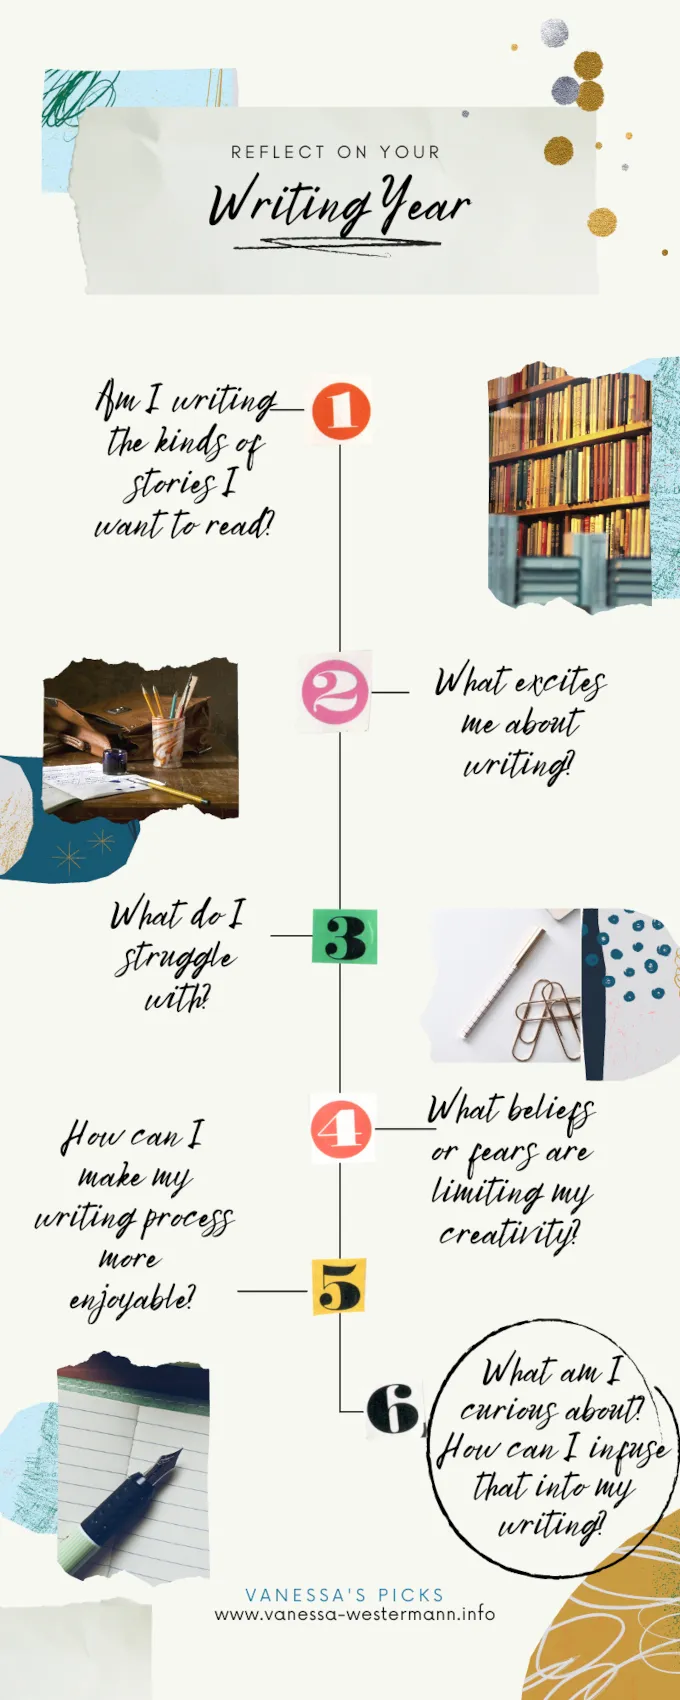 Questions to help you reflect on your writing year